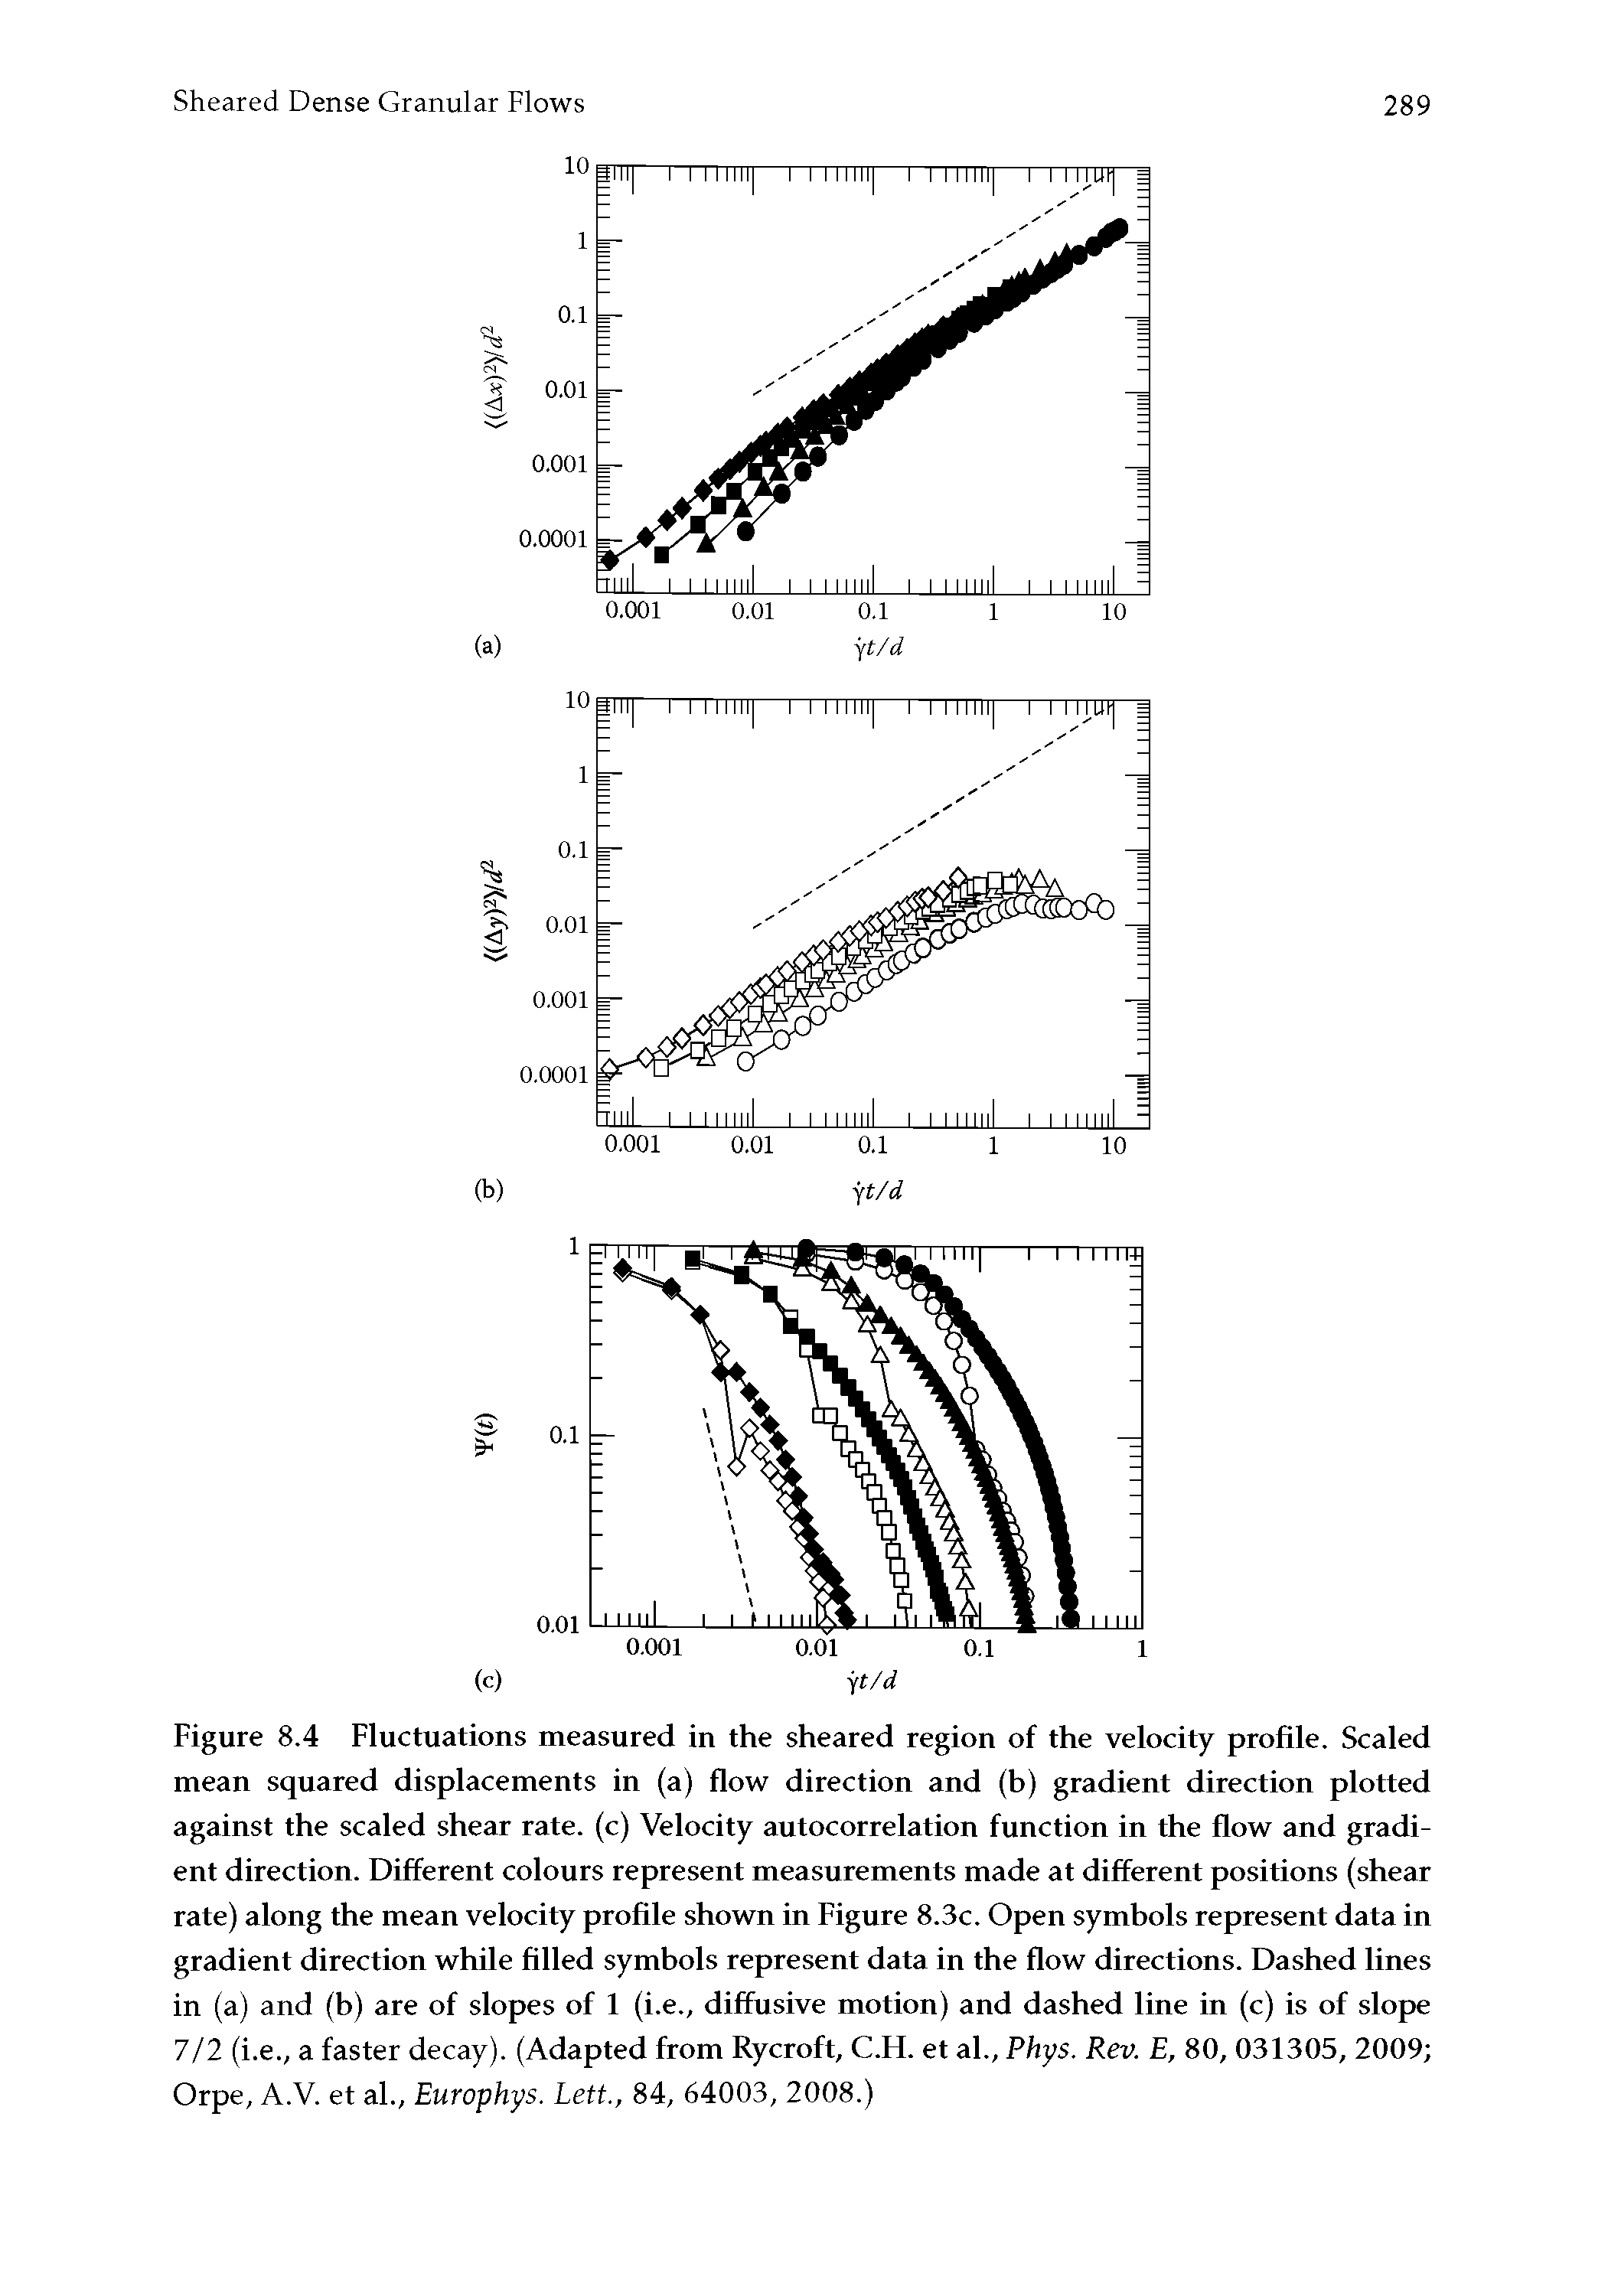 Figure 8.4 Fluctuations measured in the sheared region of the velocity profile. Scaled mean squared displacements in (a) flow direction and (b) gradient direction plotted against the scaled shear rate, (c) Velocity autocorrelation function in the flow and gradient direction. Different colours represent measurements made at different positions (shear rate) along the mean velocity profile shown in Figure 8.3c. Open symbols represent data in gradient direction while filled symbols represent data in the flow directions. Dashed lines in (a) and (b) are of slopes of 1 (i.e., diffusive motion) and dashed line in (c) is of slope 7/2 (i.e., a faster decay). (Adapted from Rycroft, C.H. et al., Phys. Rev. E, 80,031305, 2009 Orpe, A.V. et al., Europhys. Lett., 84, 64003, 2008.)...